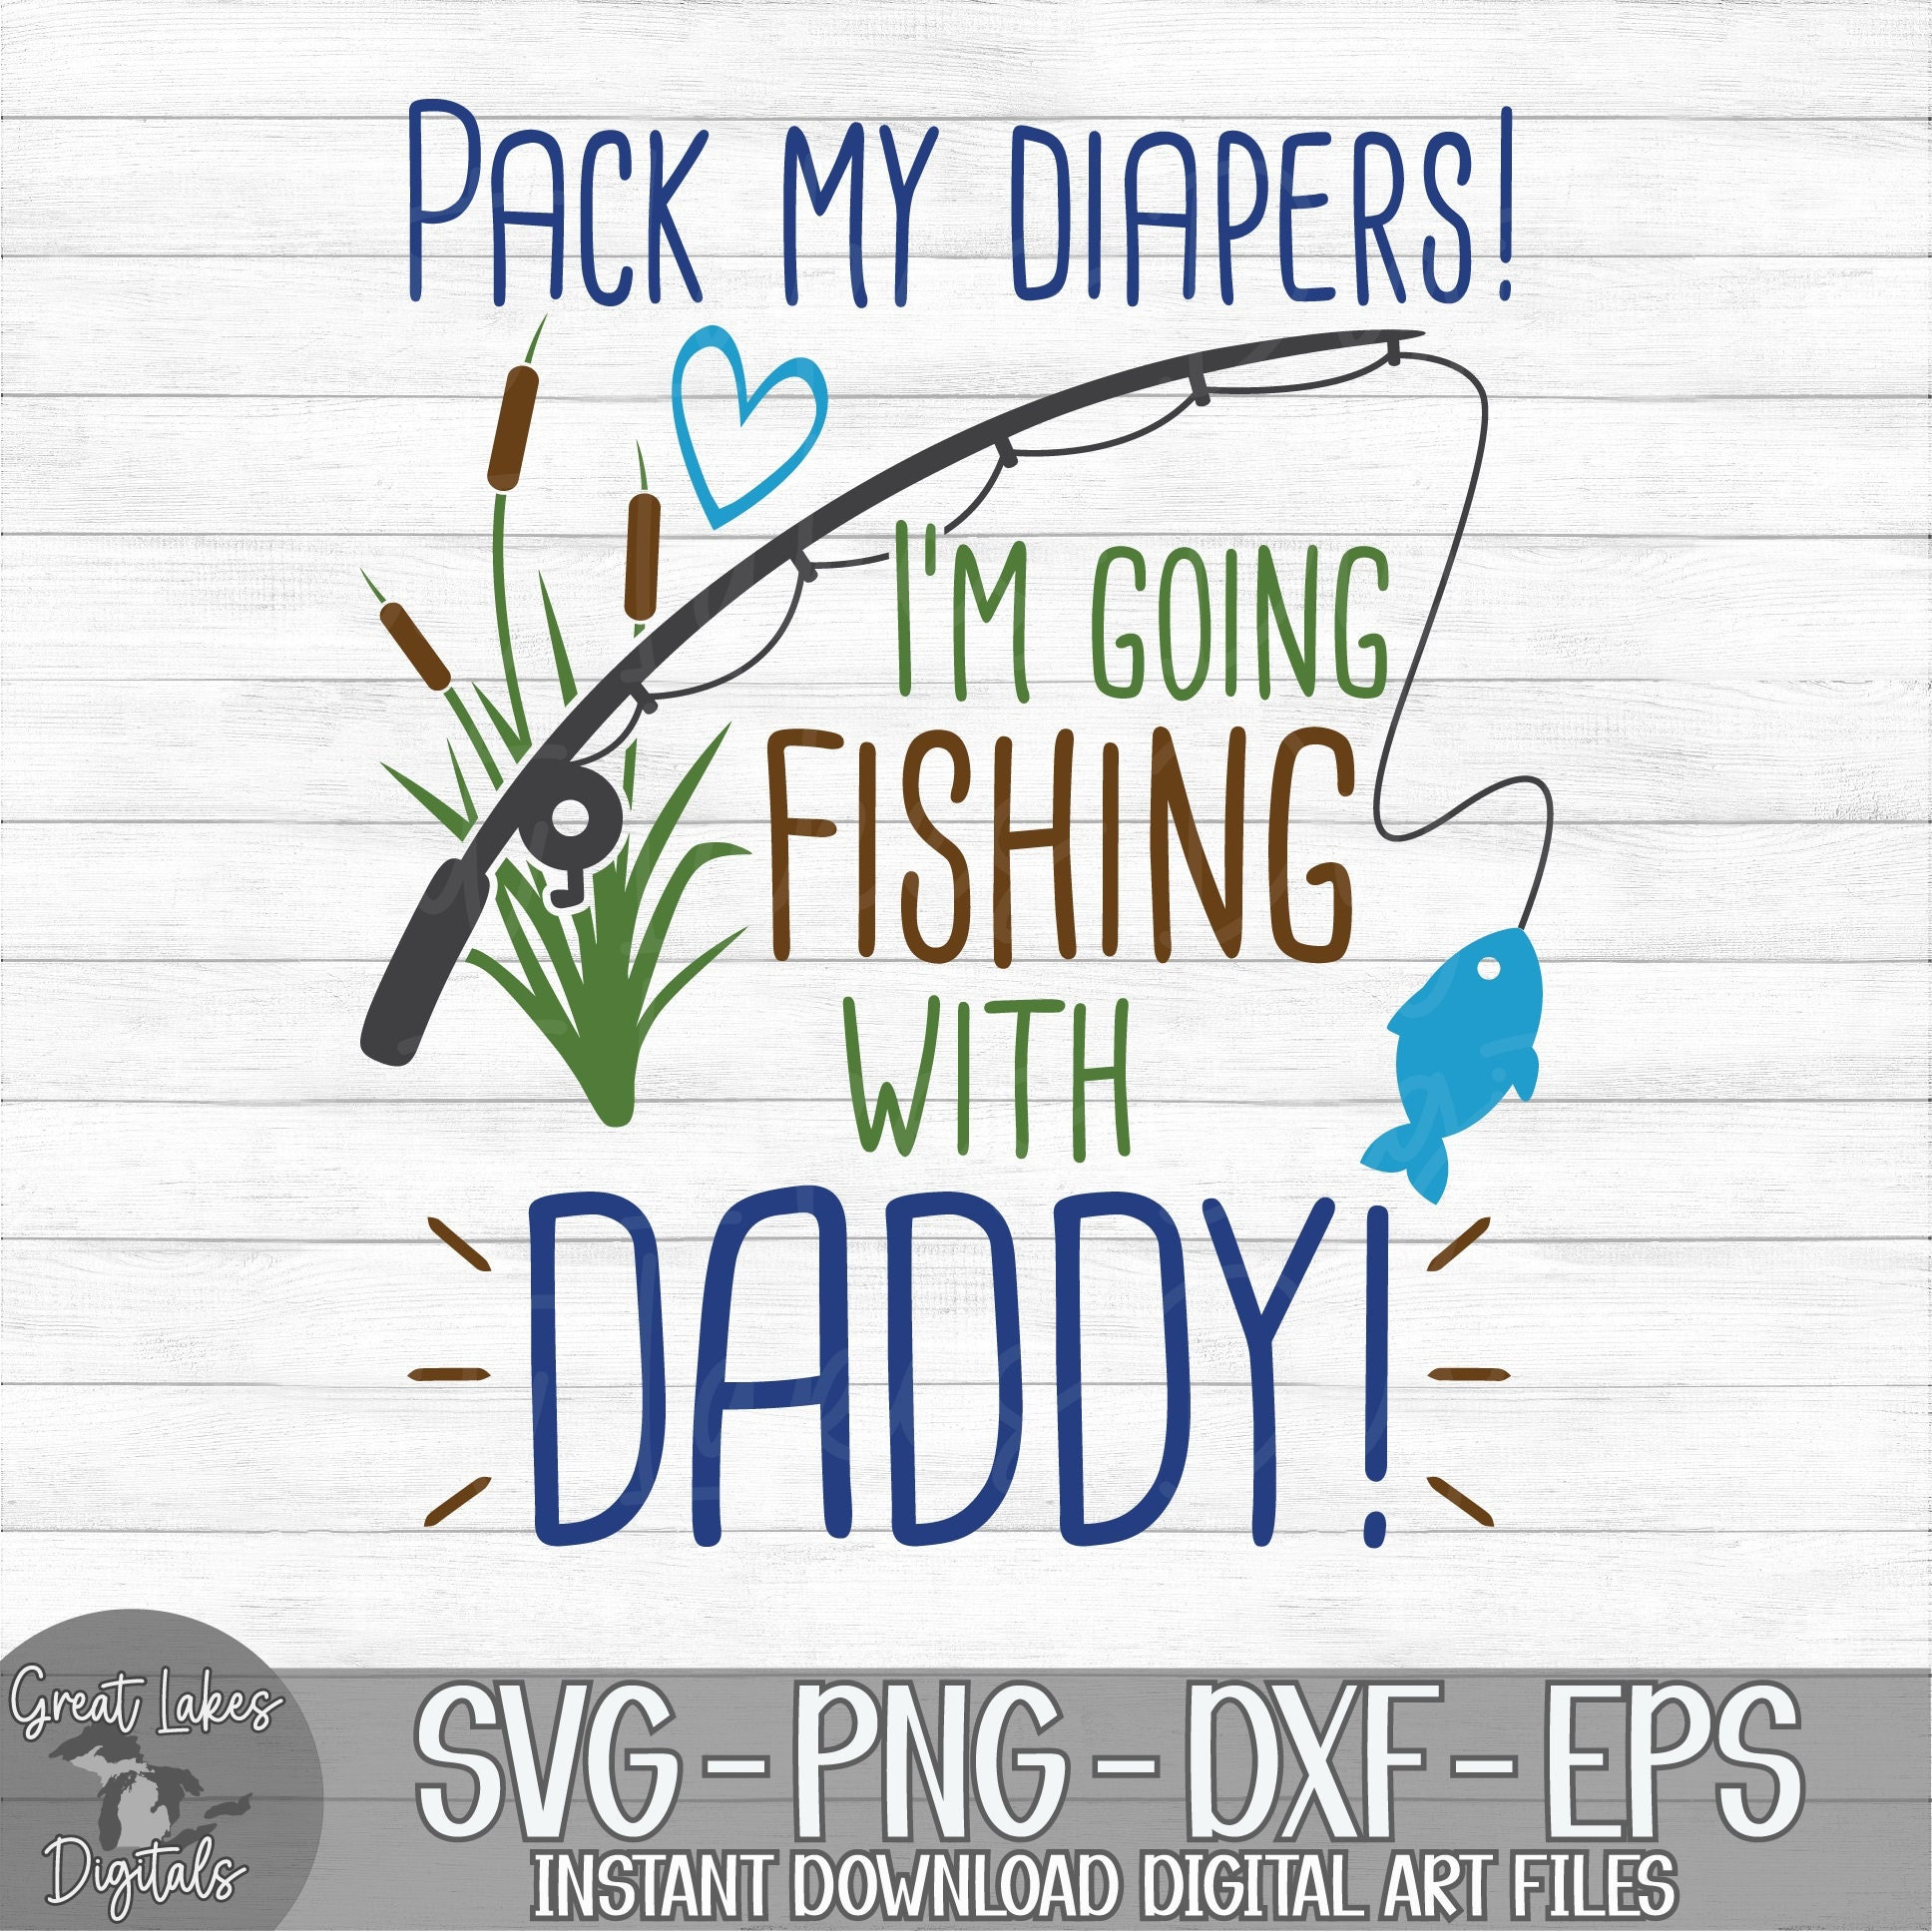 I'm Going Fishing with Daddy Design Graphic by BDB_Graphics